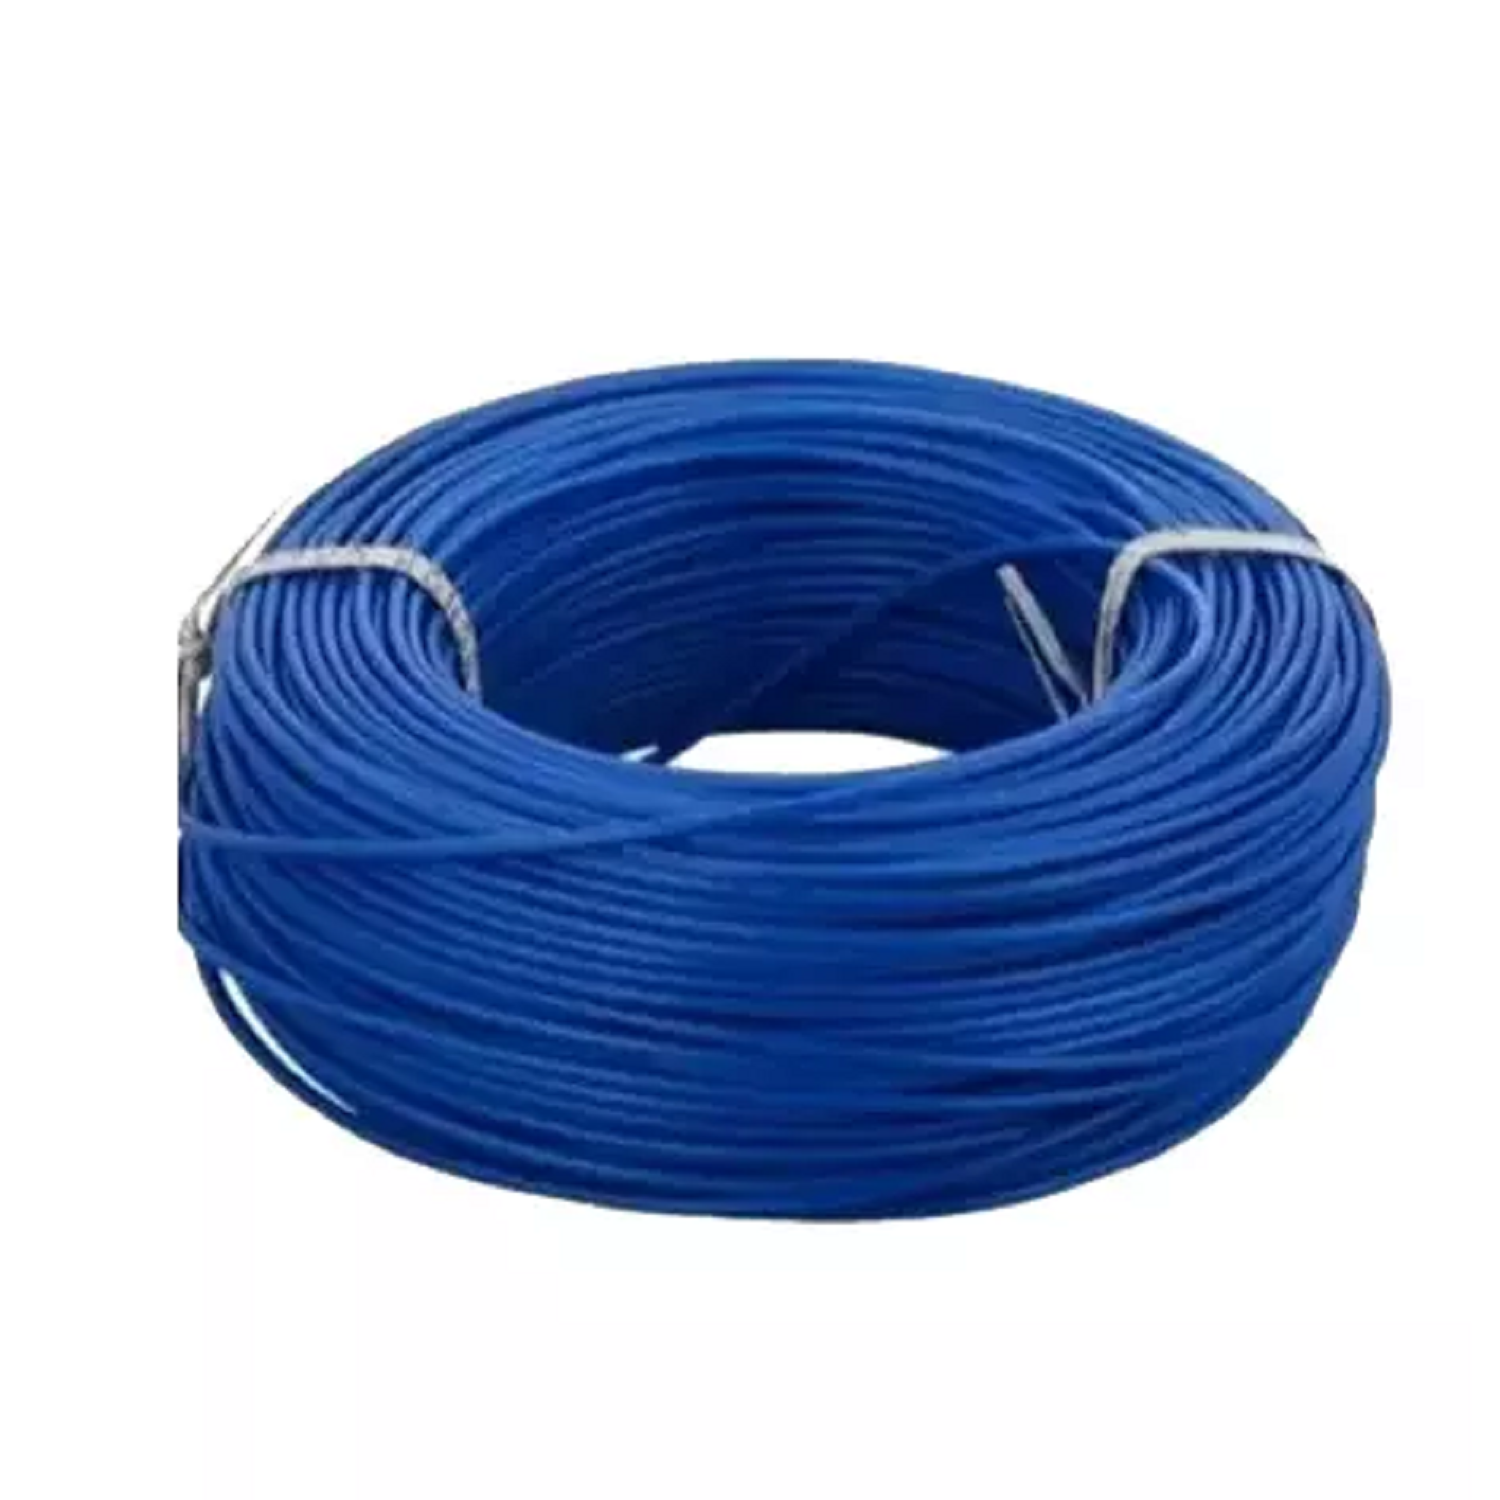 4.0 Sqmm RR FR Single Core Copper Wire (180 Mtr) With PVC Insulated for Domestic 38 Industrial Uses 